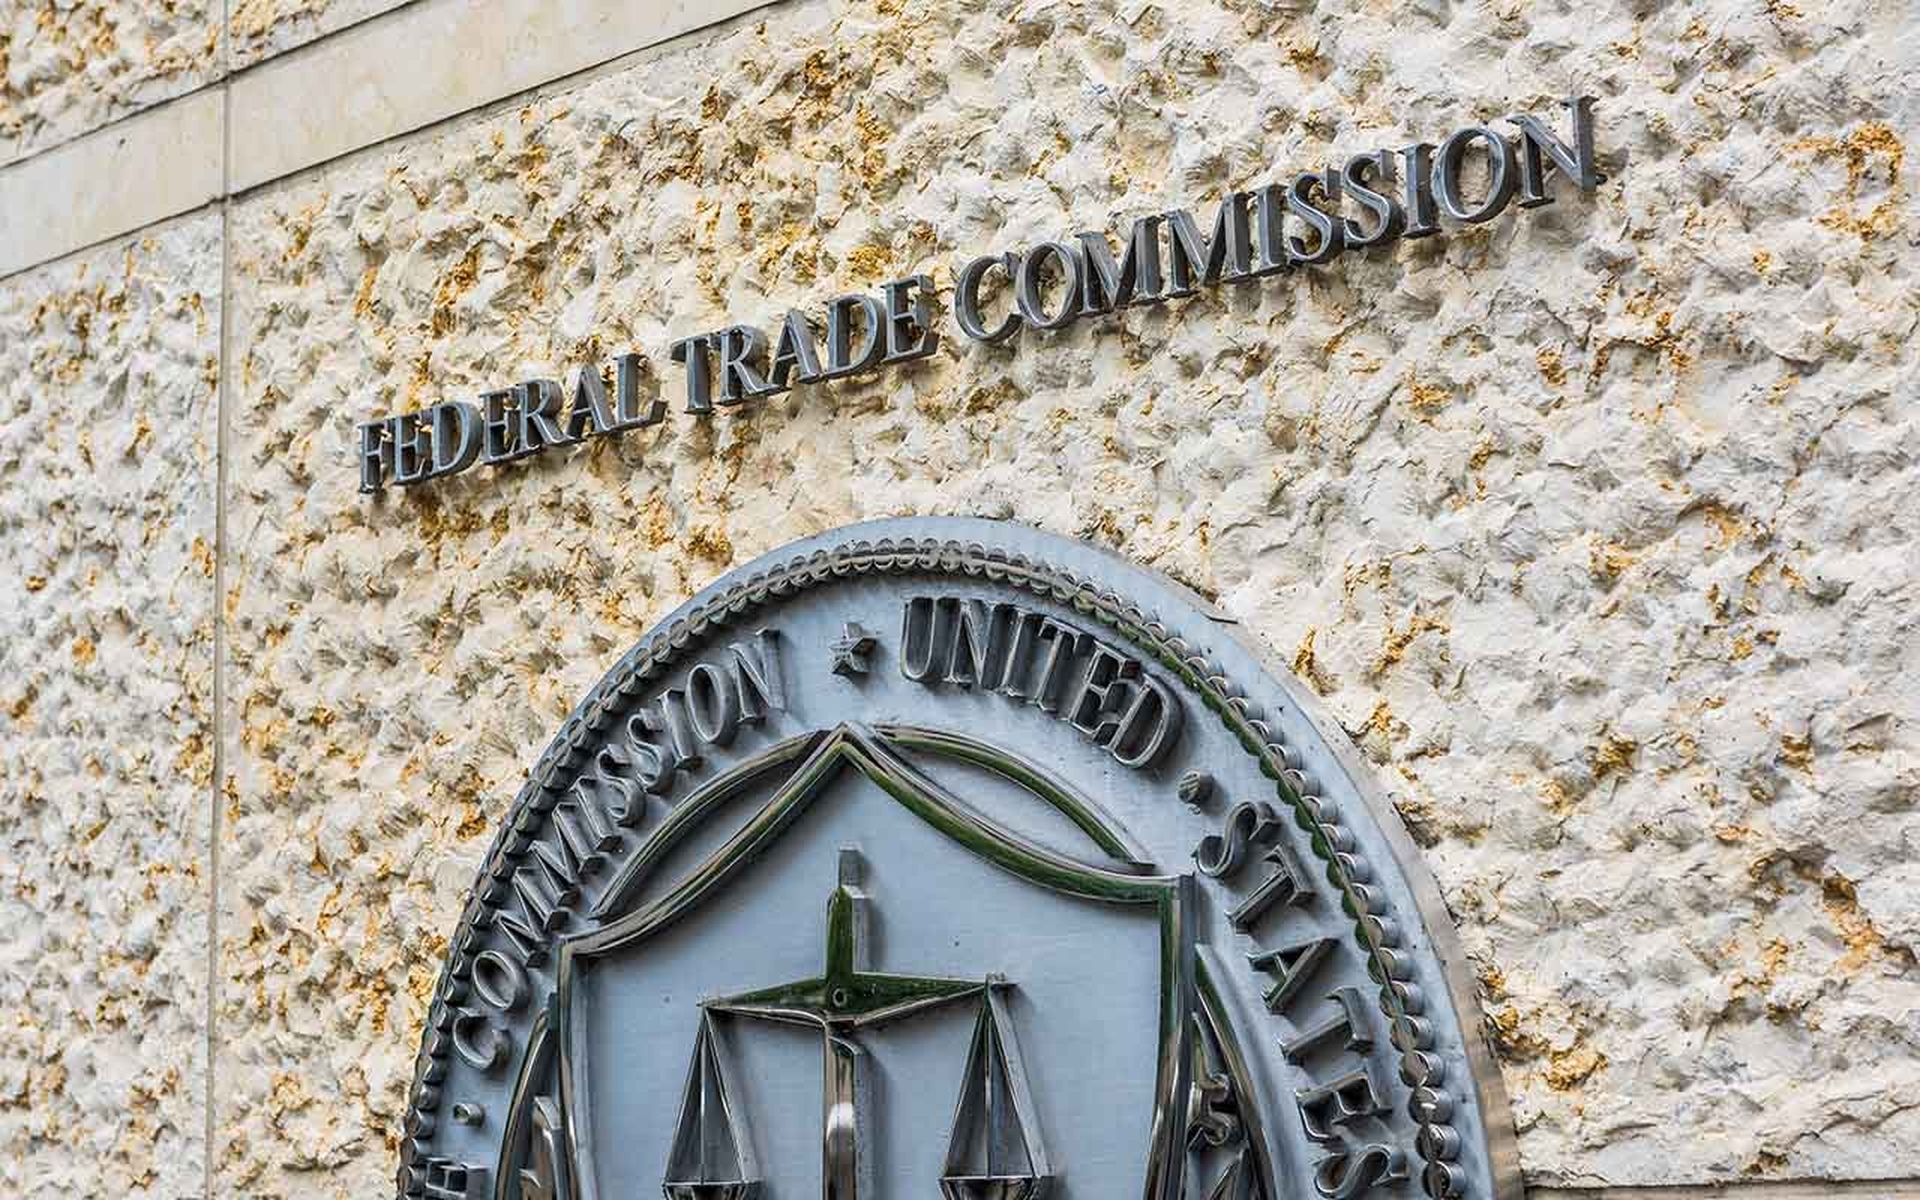 Federal Trade Commission seal, sign and logo is seen in Washington.